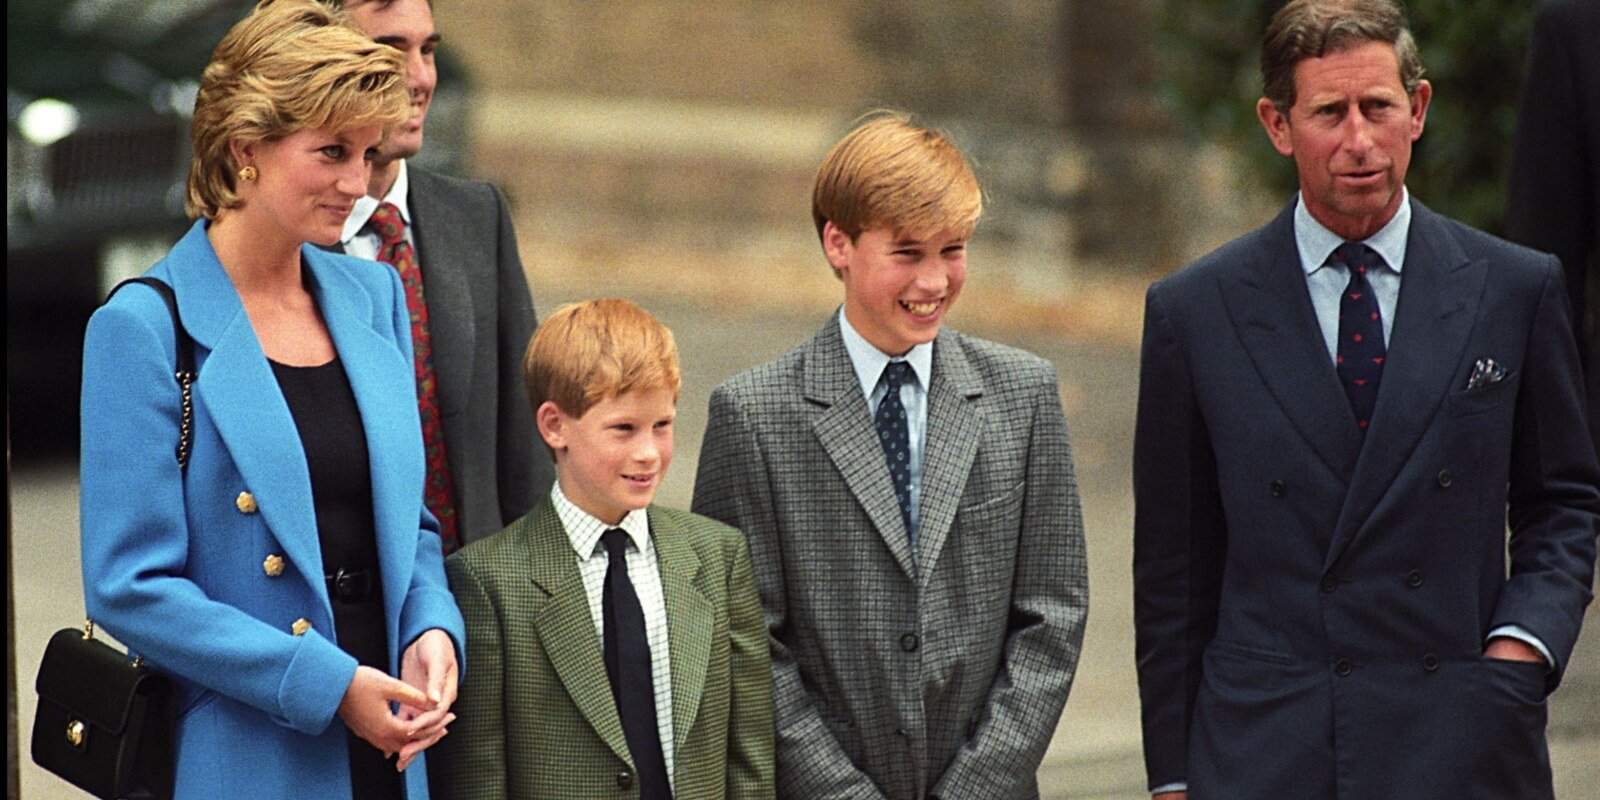 Princess Diana, Prince Harry, Prince William and then-Prince Charles on William's first day at Eton College.